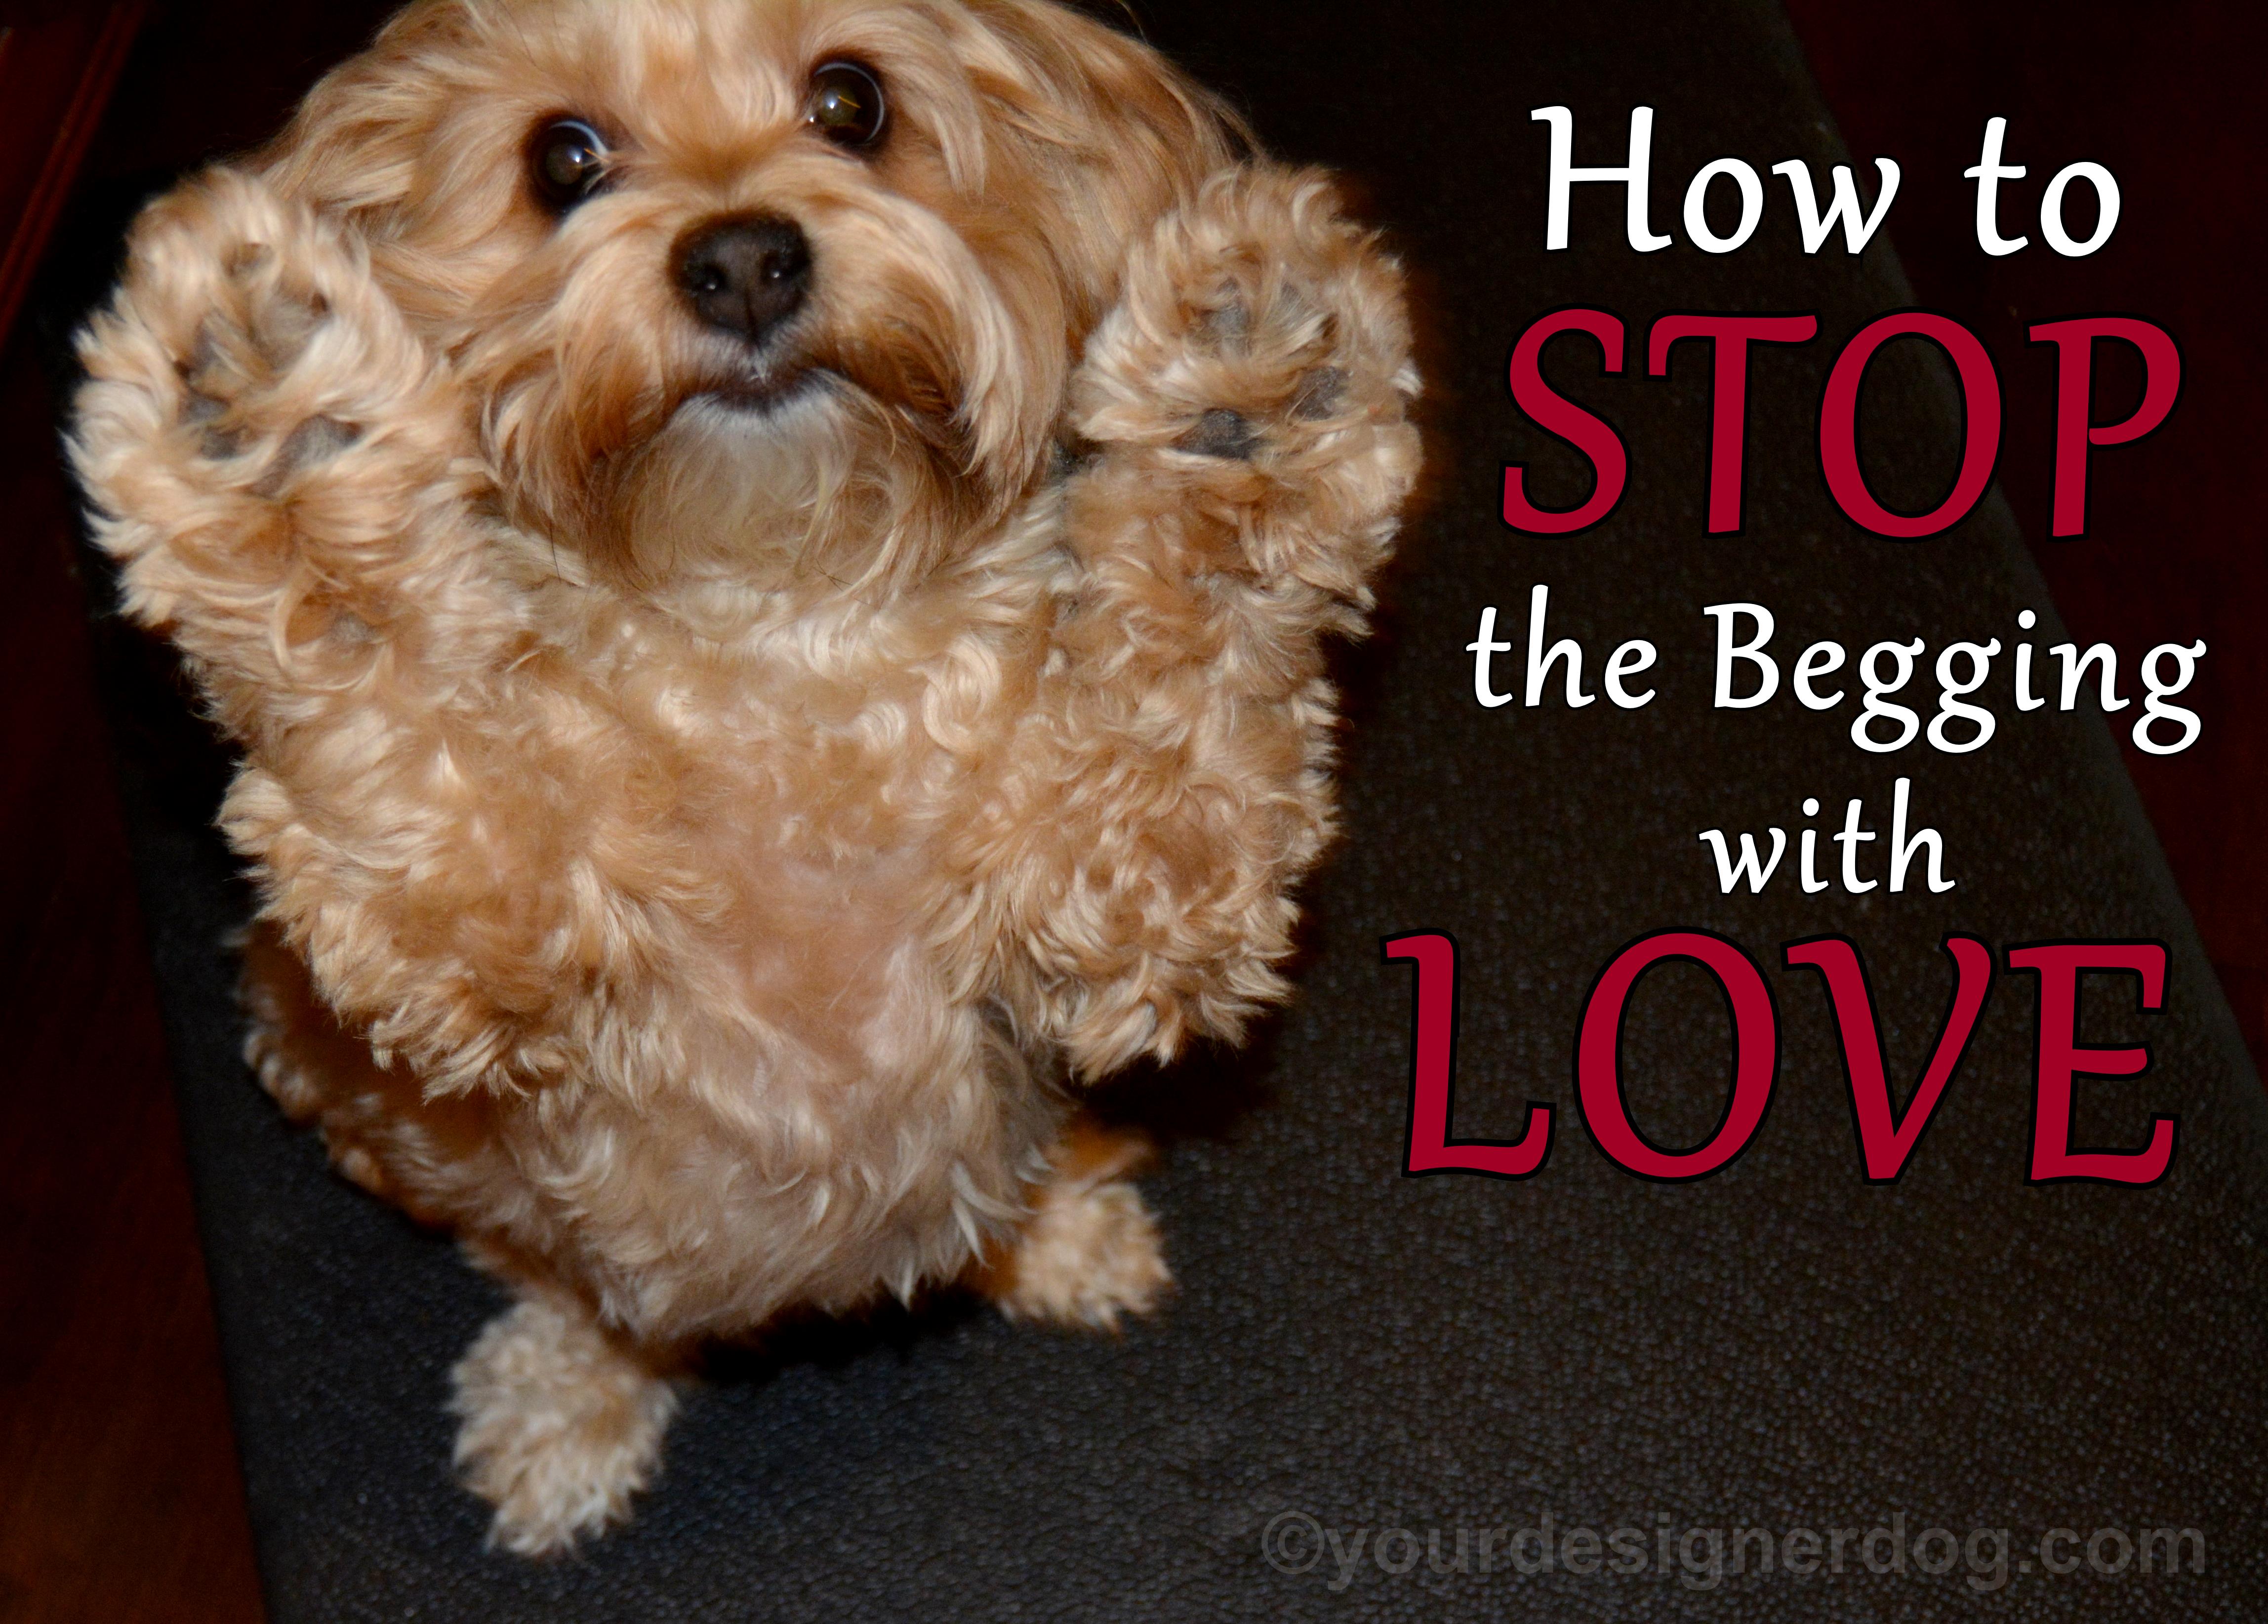 dogs, designer dogs, yorkipoo, yorkie poo, begging, how to